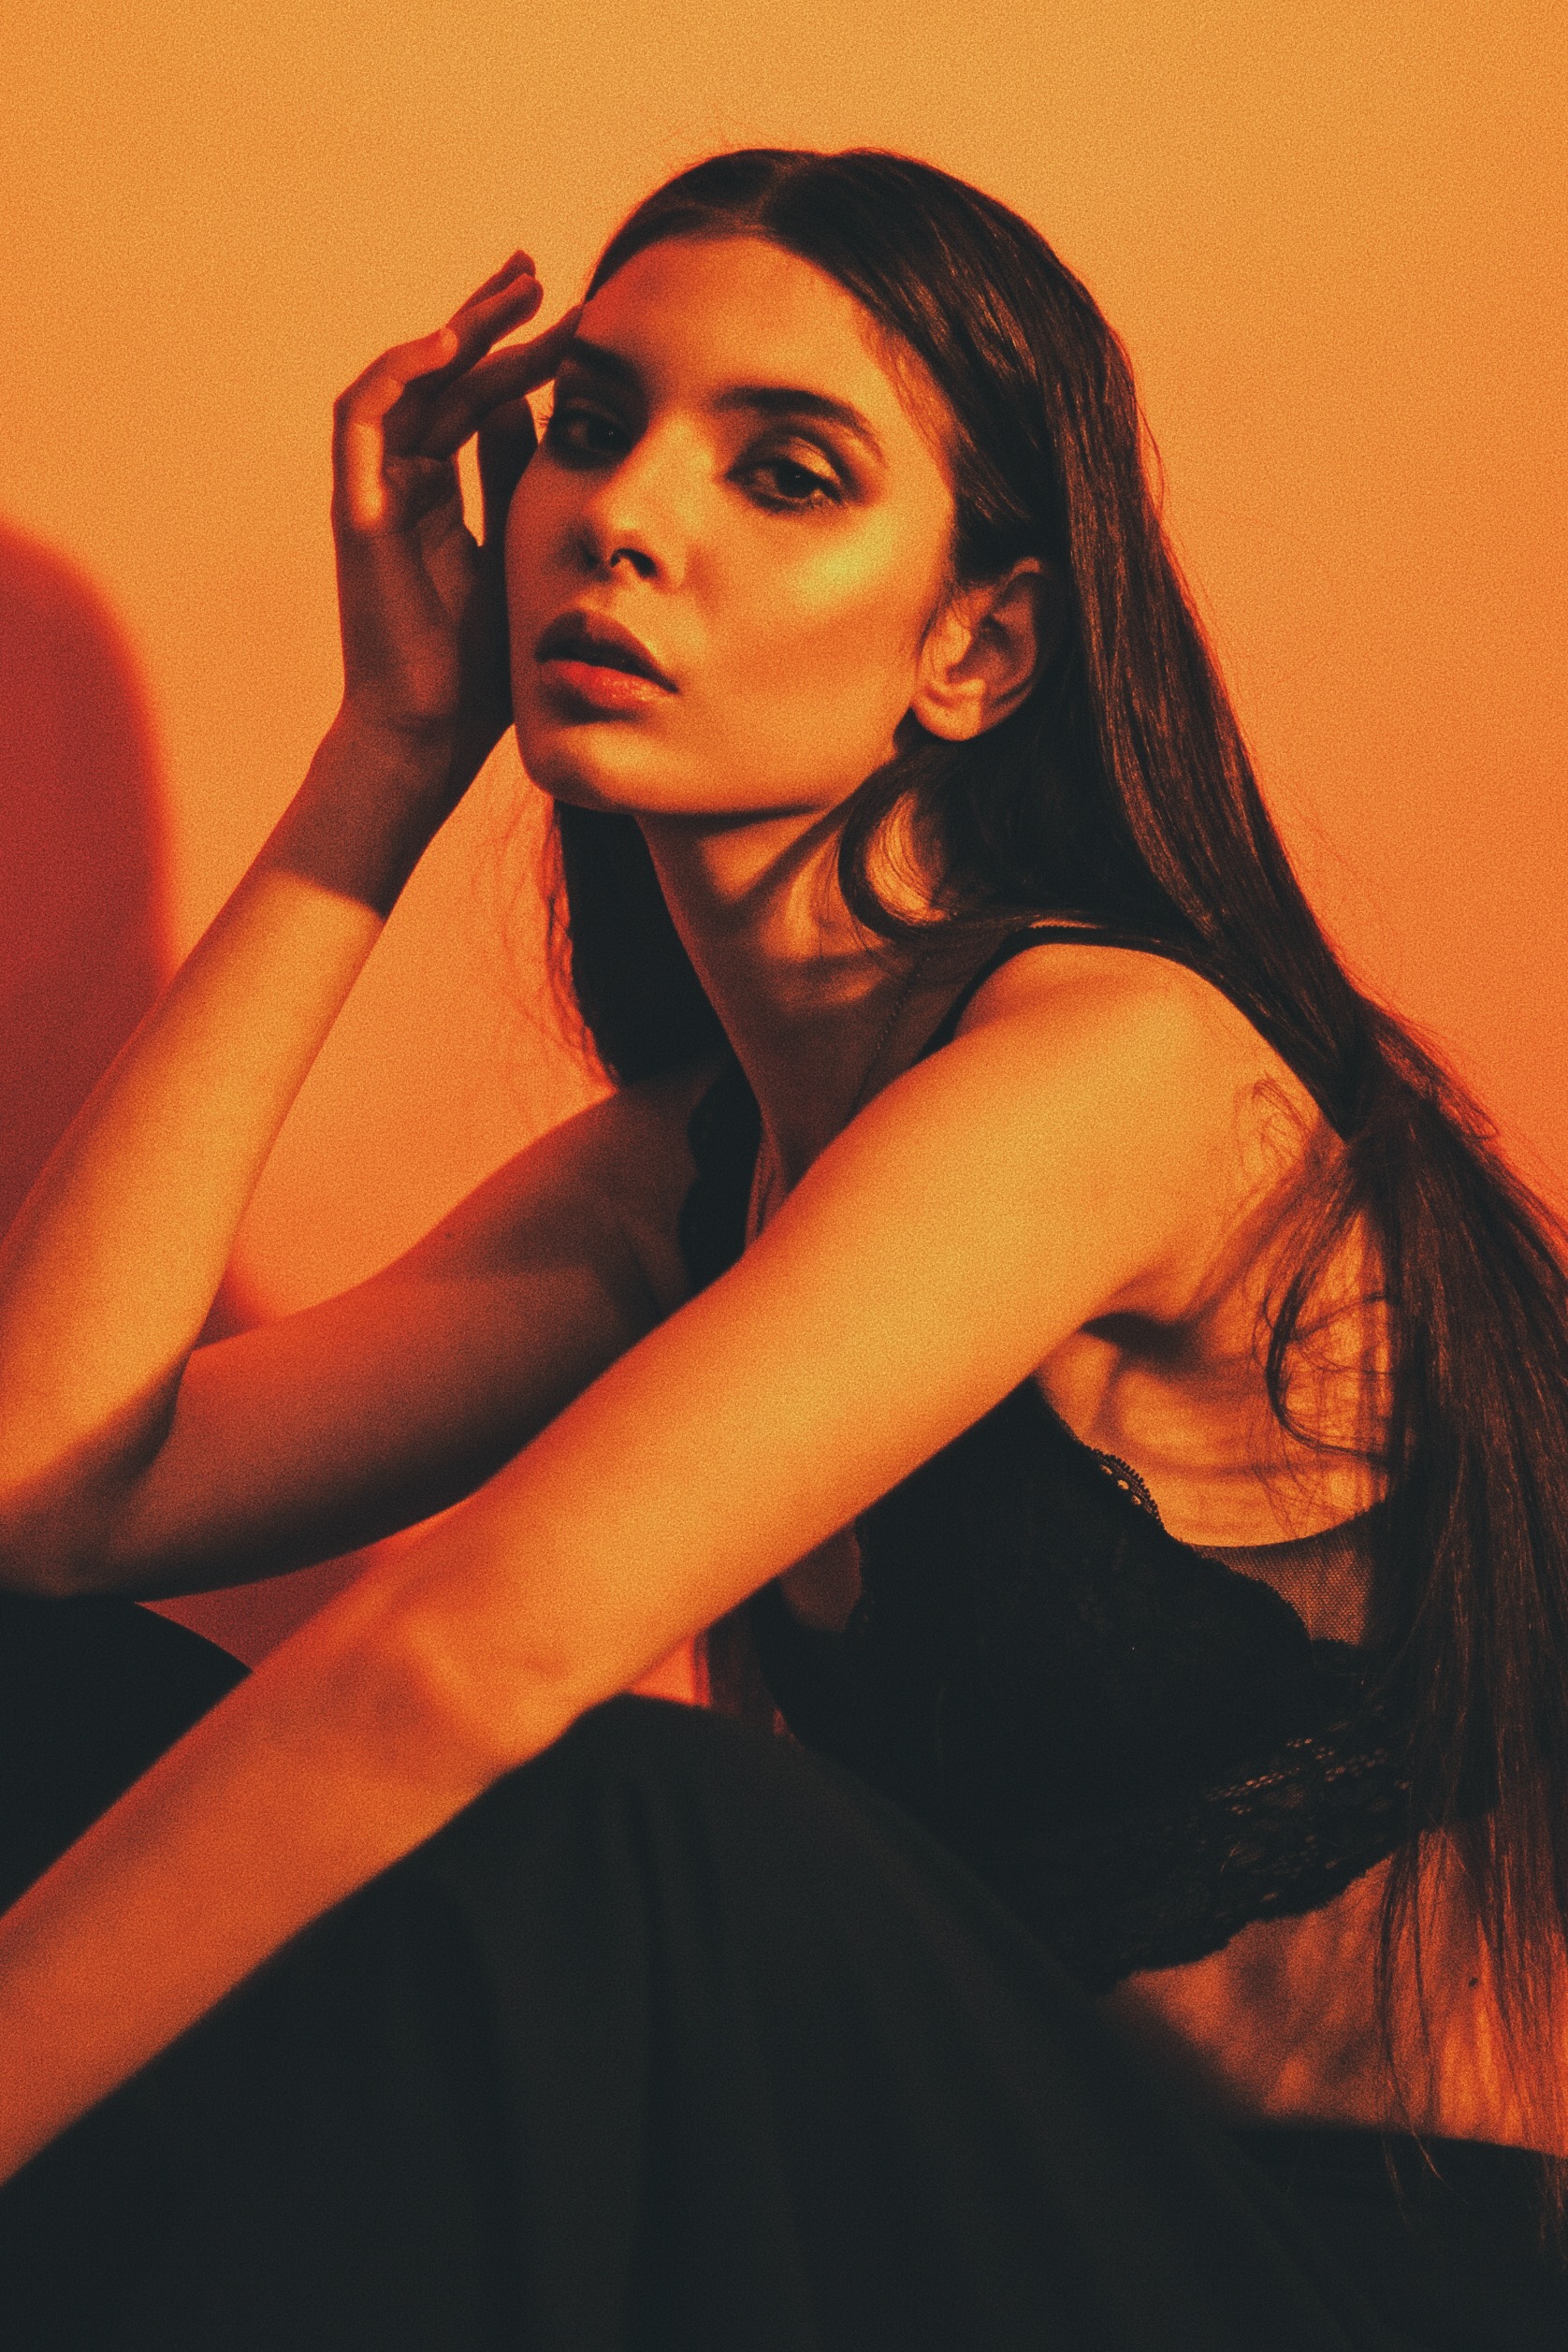 Red Light - Editorial by Anastasia Asty